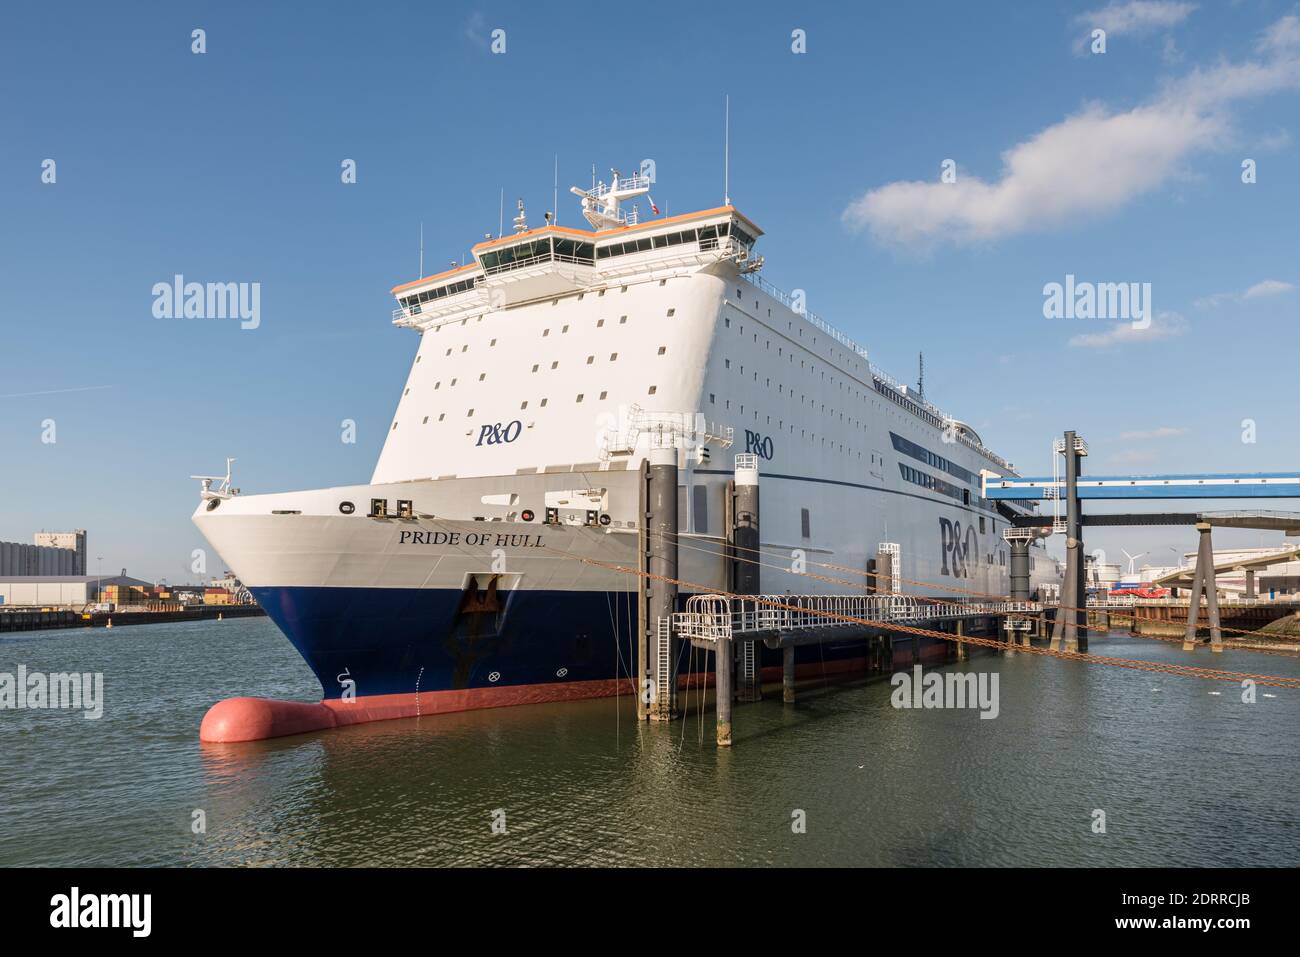 ROTTERDAM EUROPOORT, THE NETHERLANDS - FEBRUARY 29, 2016: The ferry Pride of Hull is moored at the terminal of P&O North Sea Ferries in Rotterdam Euro Stock Photo